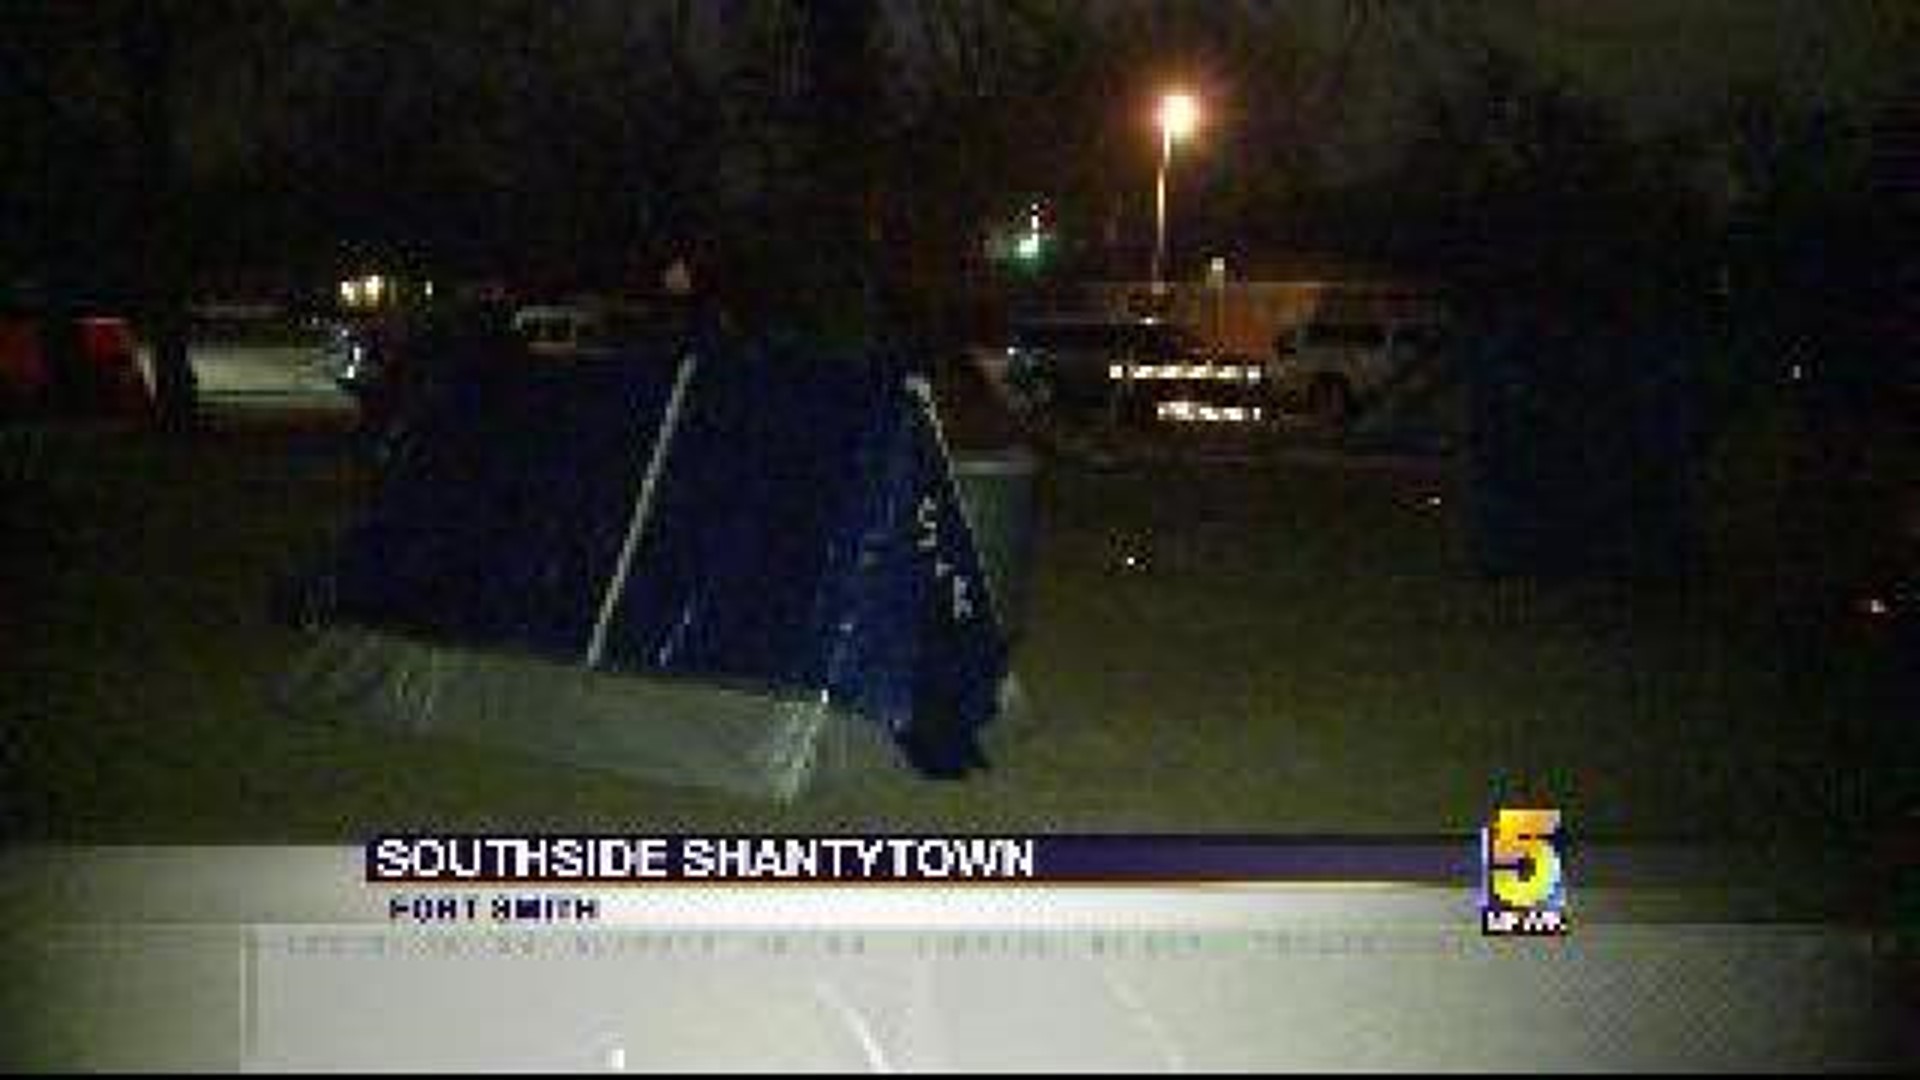 Fort Smith Shantytown